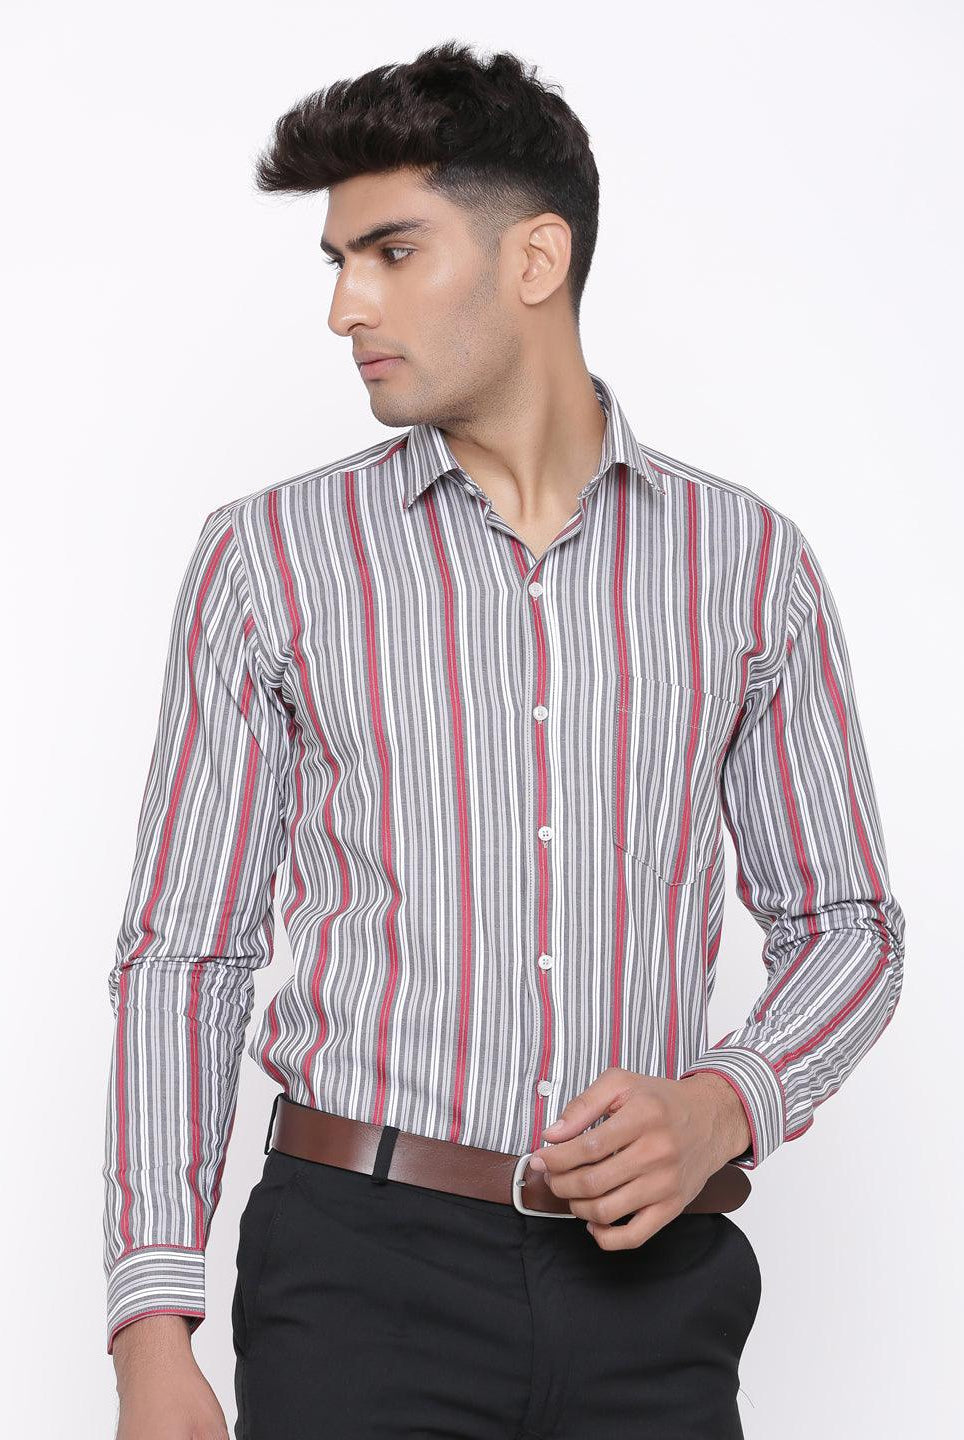 Grey and Pink Stripes Shirt - Tistabene